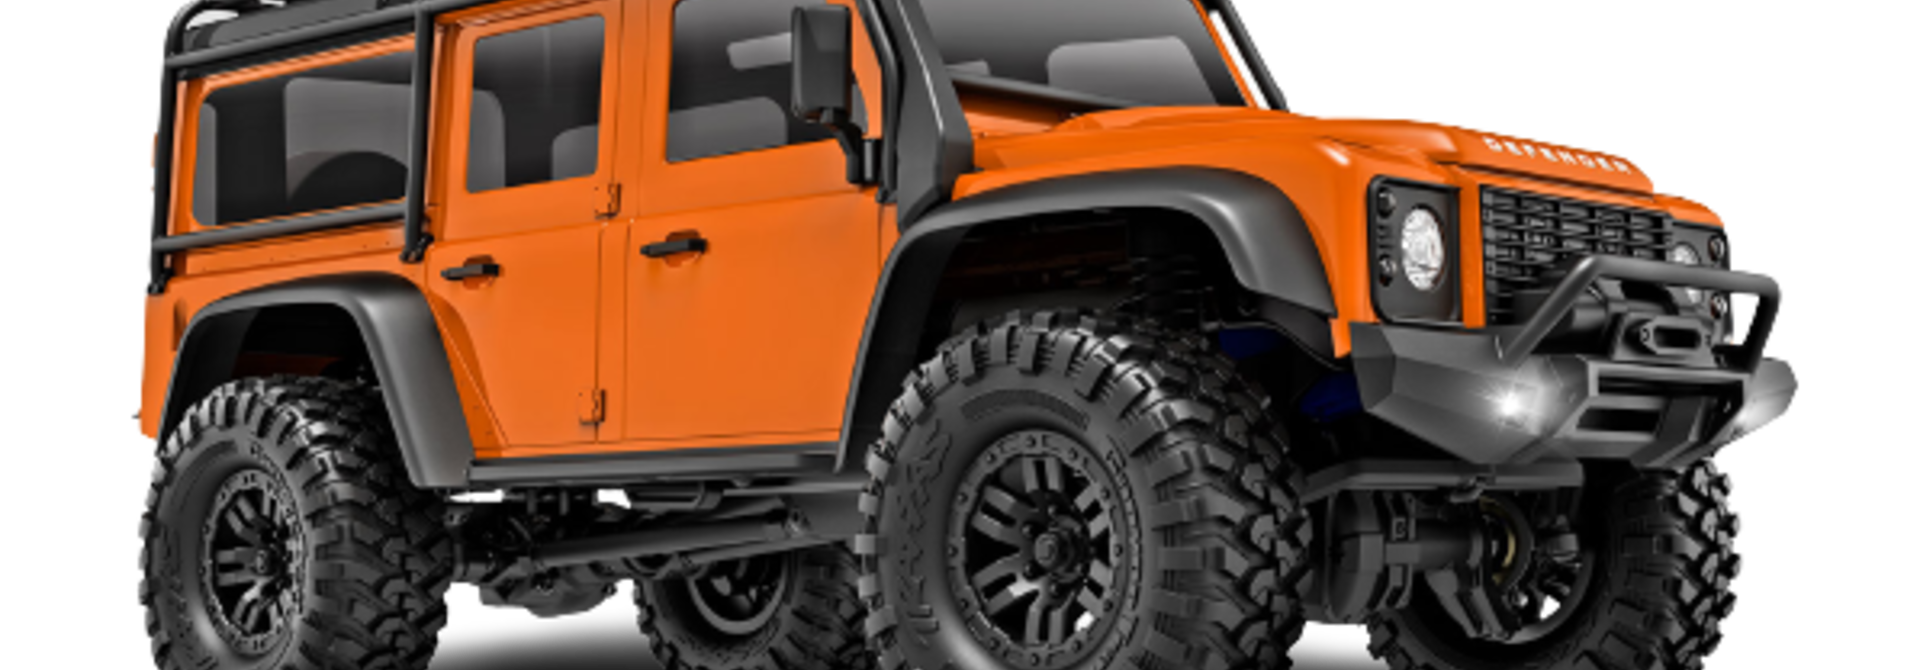 TRX-4M 1/18 Scale and Trail Crawler Land Rover 4WD Electric Truck with TQ Orange TRX97054-1ORNG